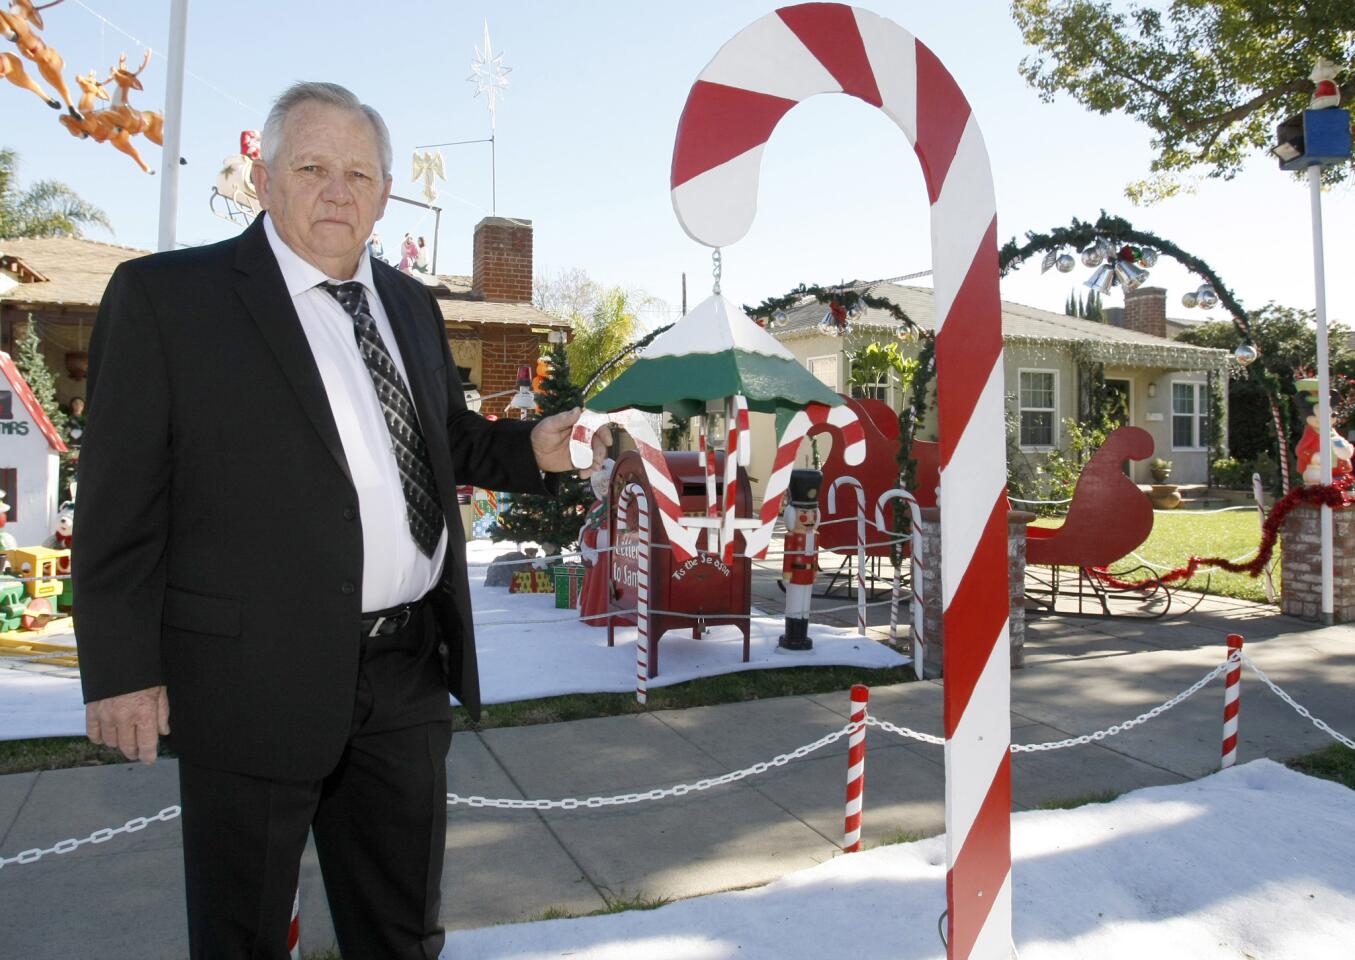 Ed Pape's Christmas-decorated home is the Burbank Civic Pride Committee's 2016 Holiday Decorating Contest winner.